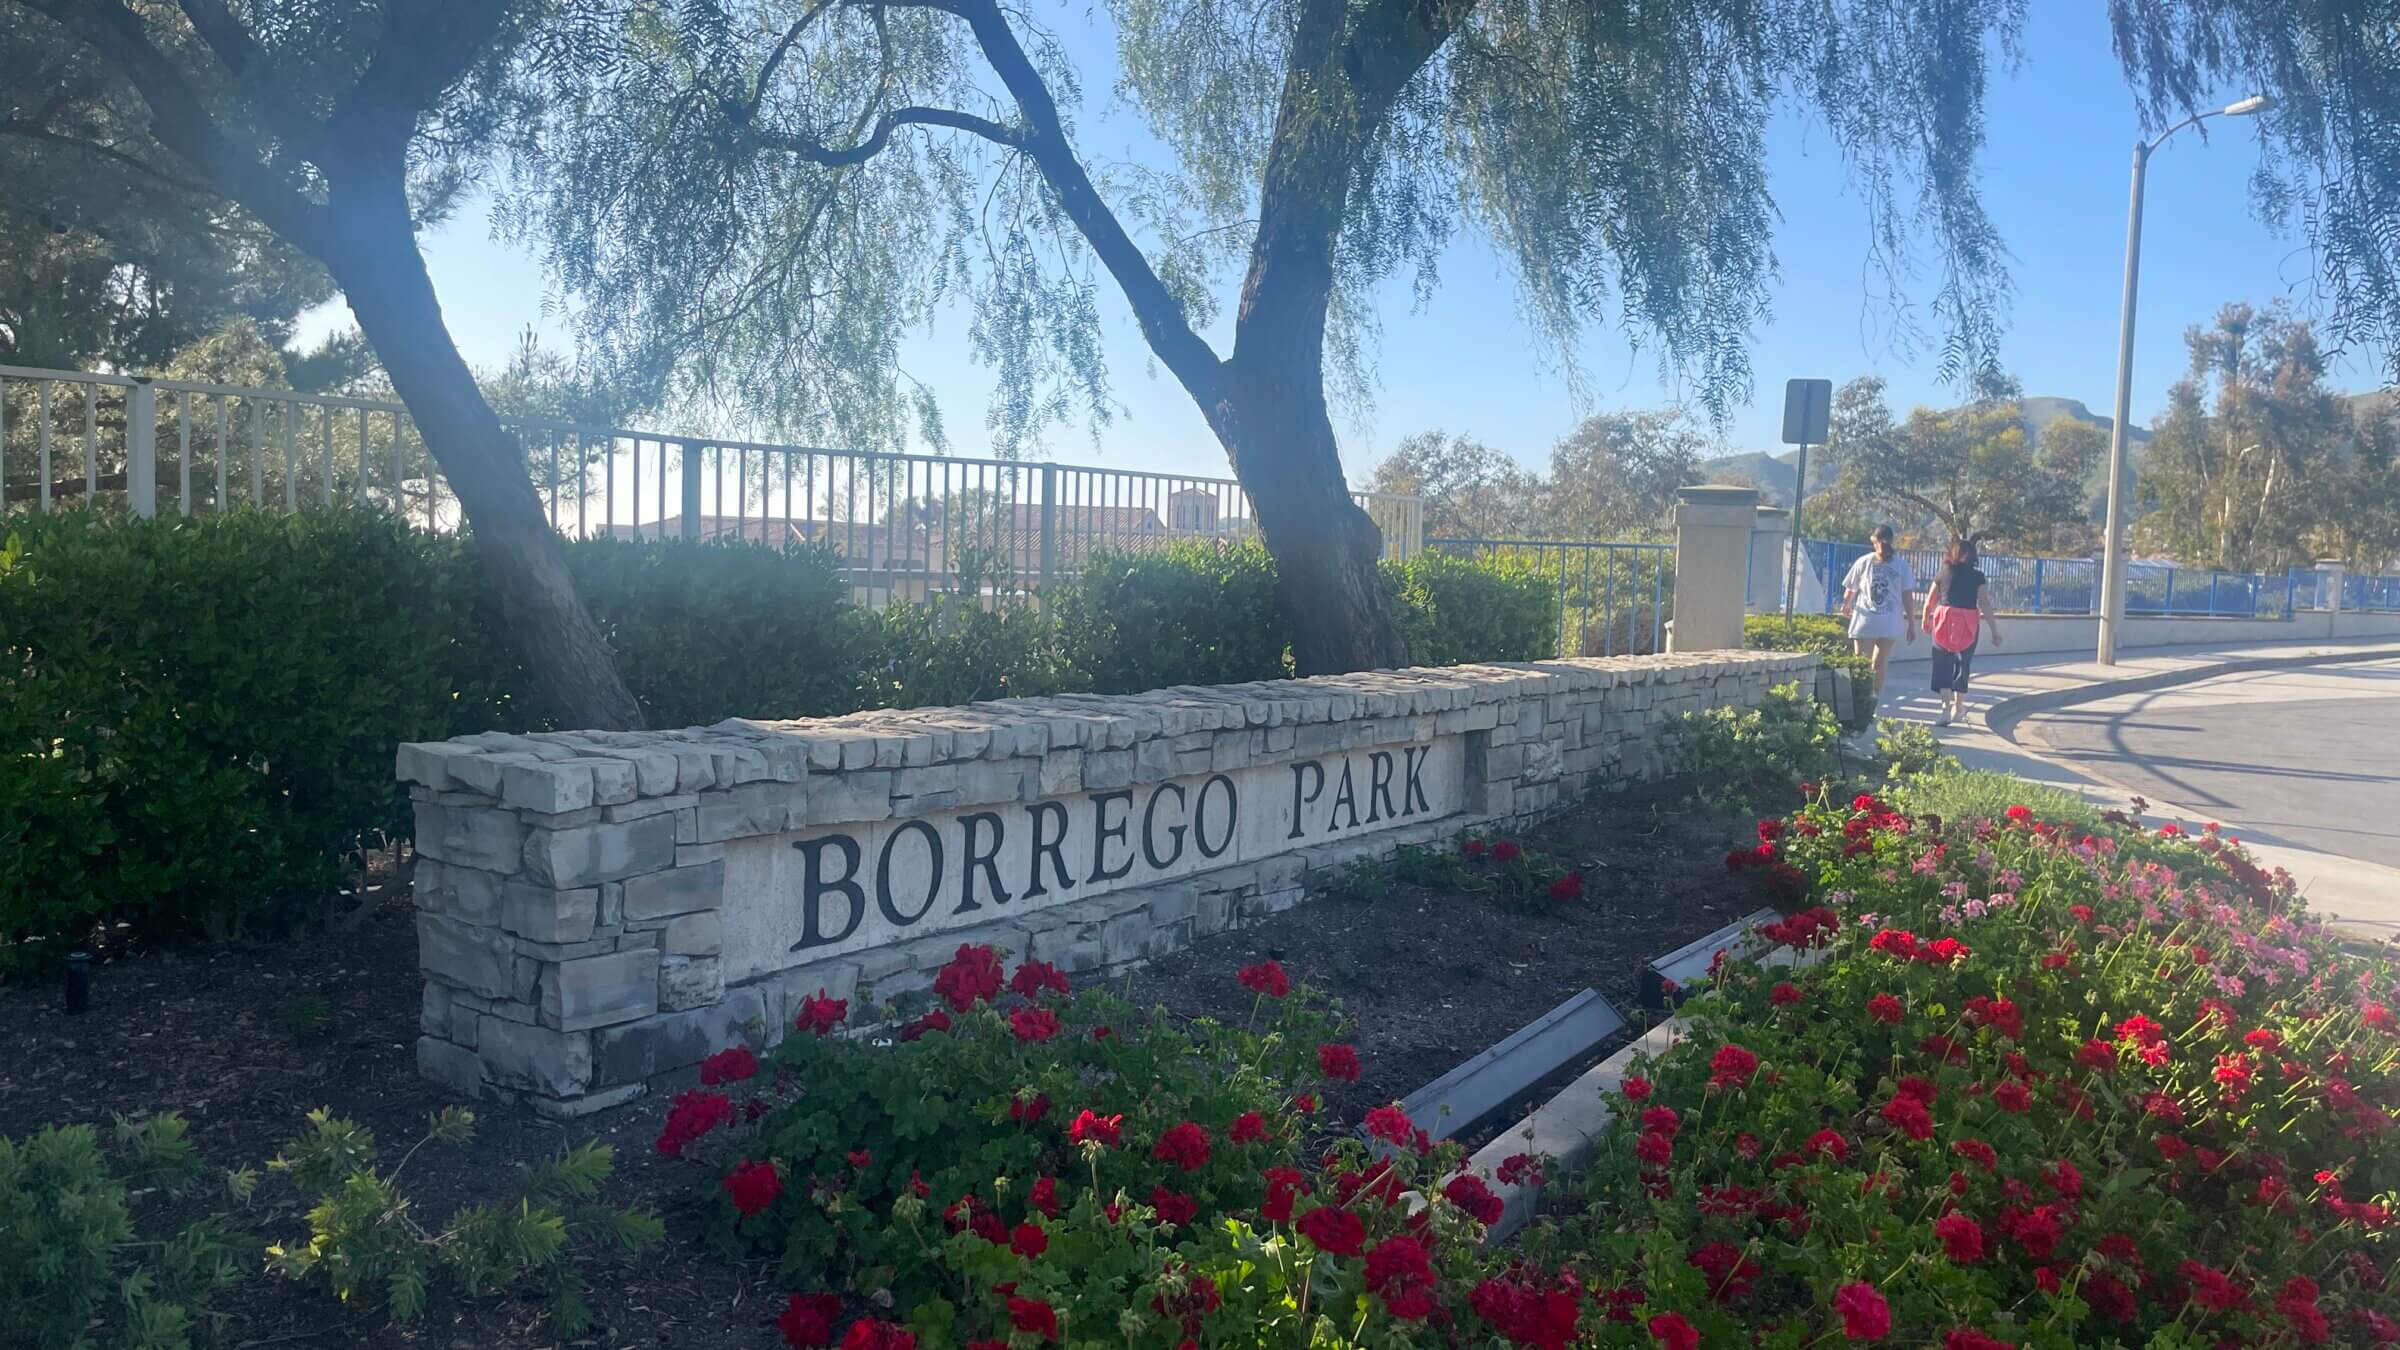 The entrance to Borrego Park in Lake Forest, California. Blaze Bernstein's body was discovered buried at the park on Jan. 10, 2018.